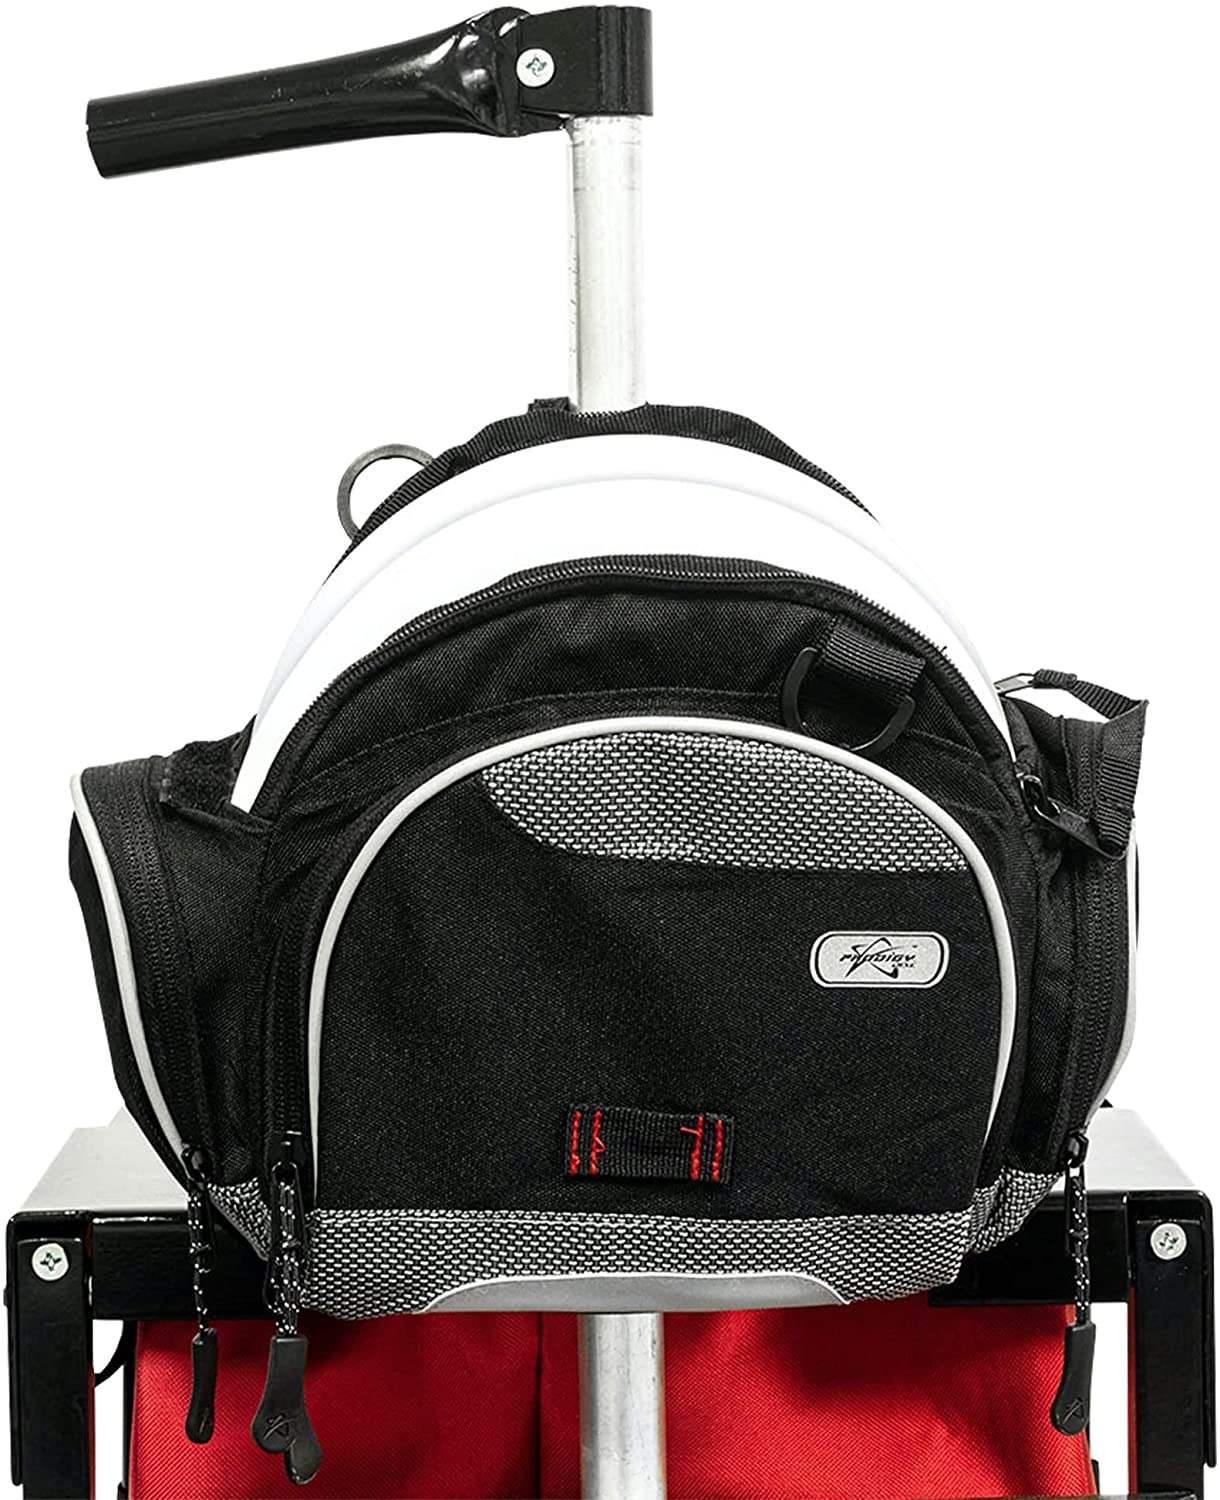 Prodigy Disc Putter Pouch for Disc Golf Carts - Pouch Holds 2 Putters and Additional Items - Disc Golf Deals USA